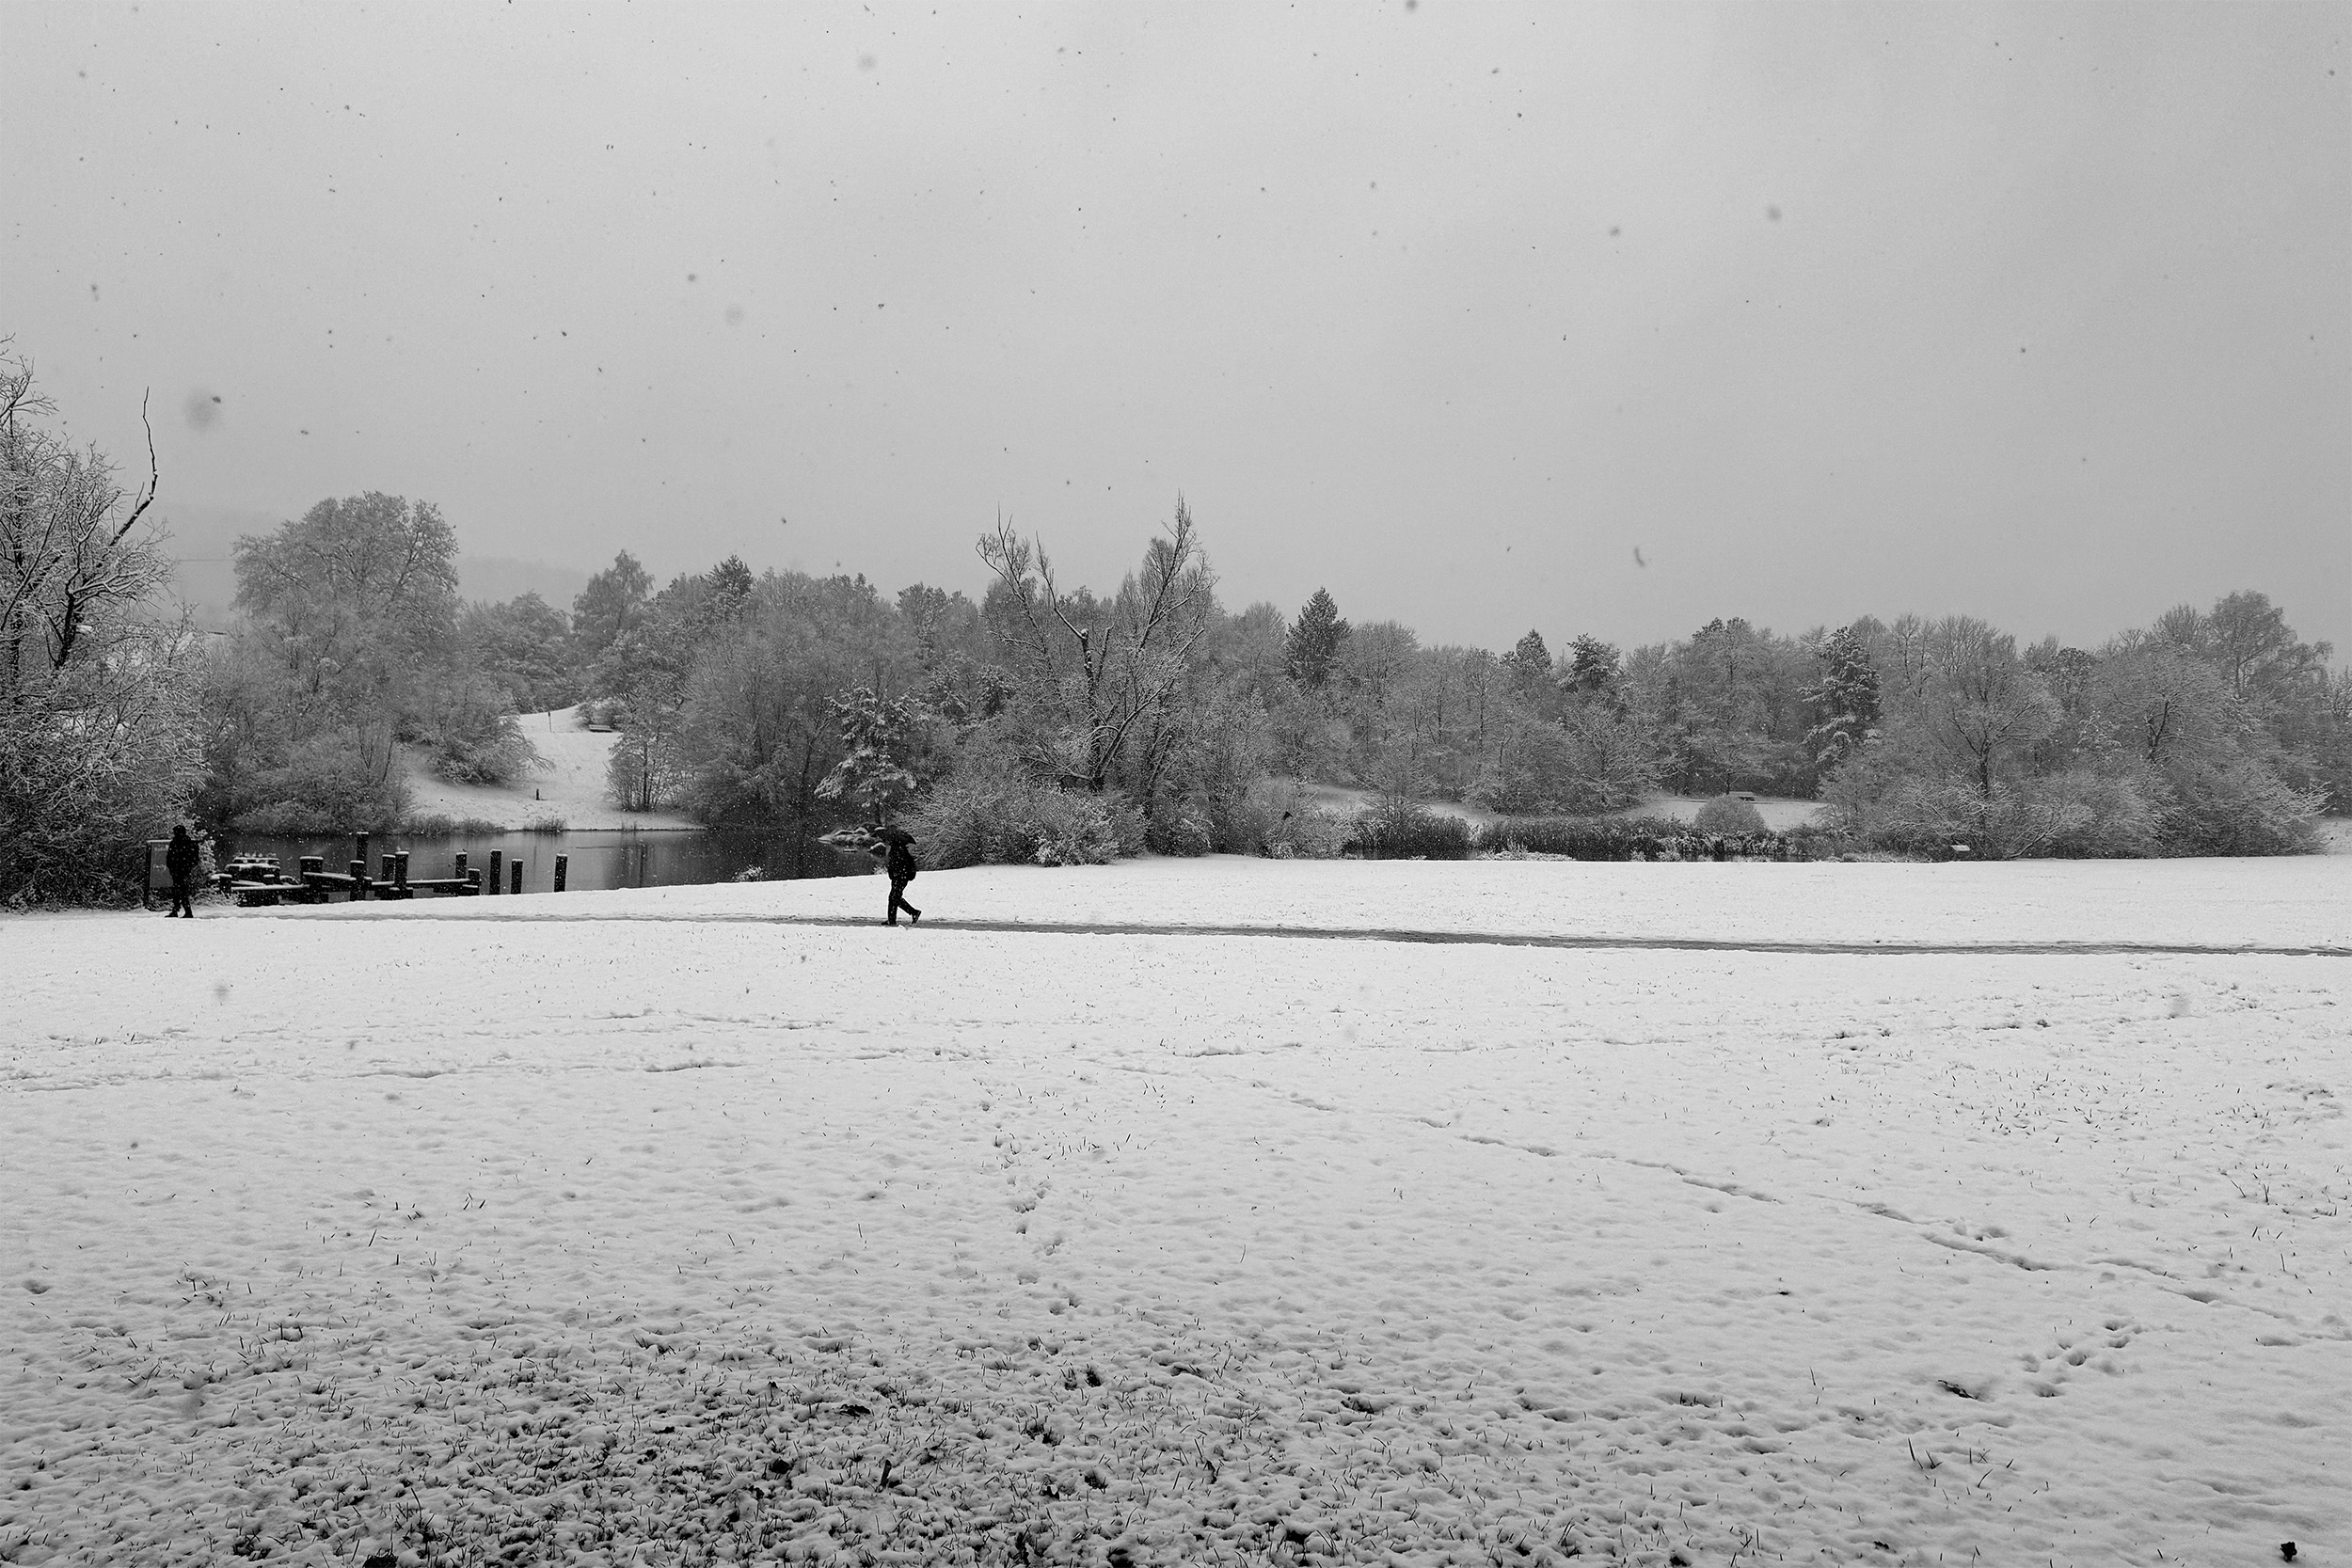 Irchelpark in a thin layer of snow, this morning on my way to the office.